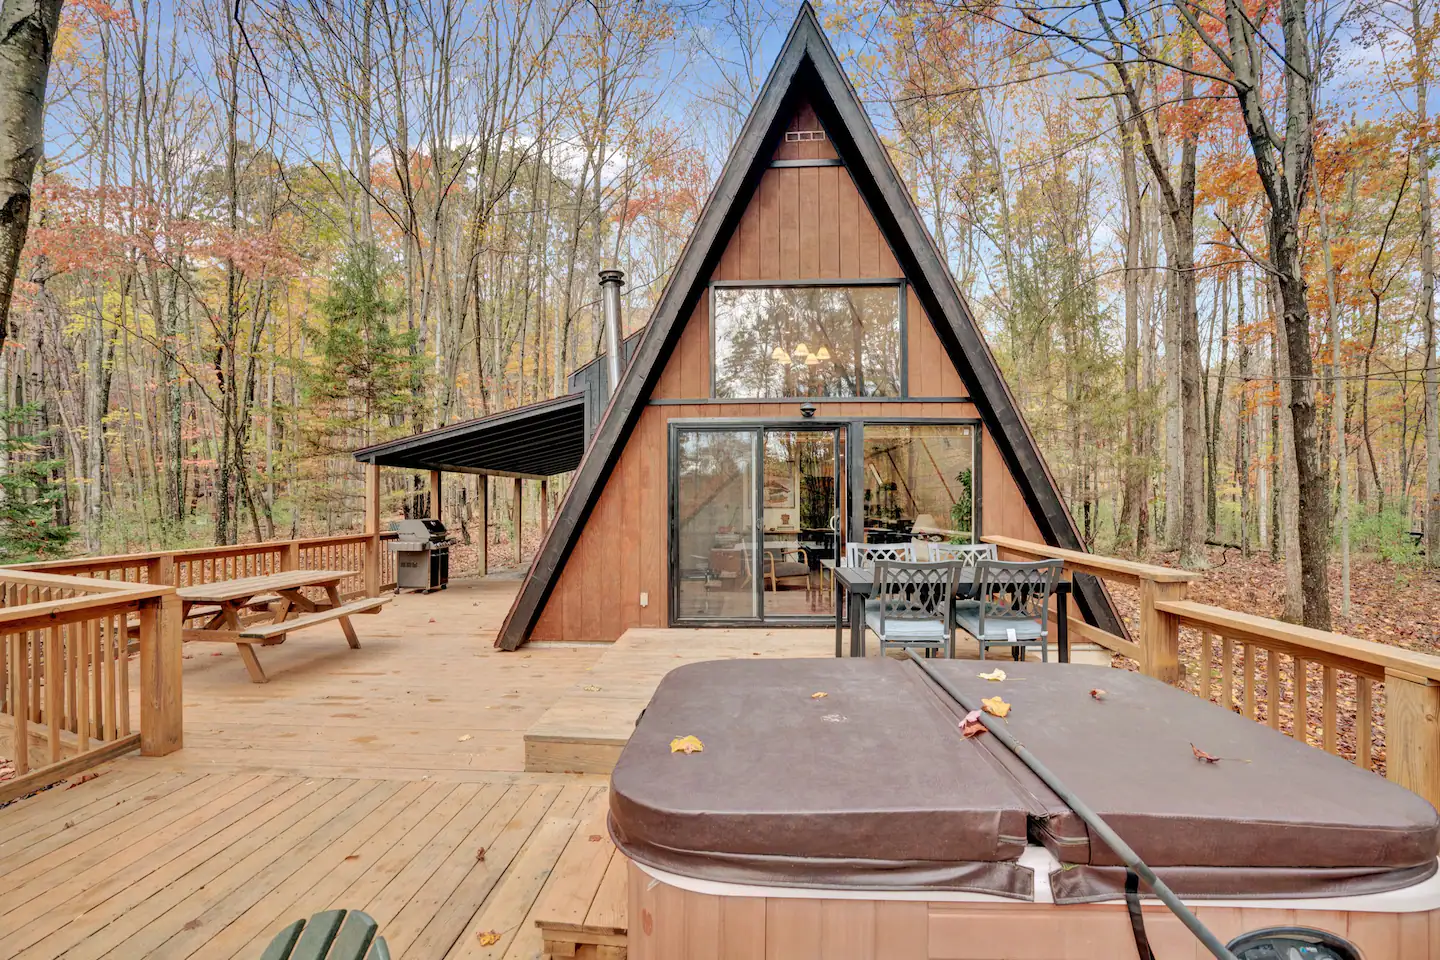 The exterior of the cabin has lots of amenities such as hot tubs and dinner table if you wish to dine outside.